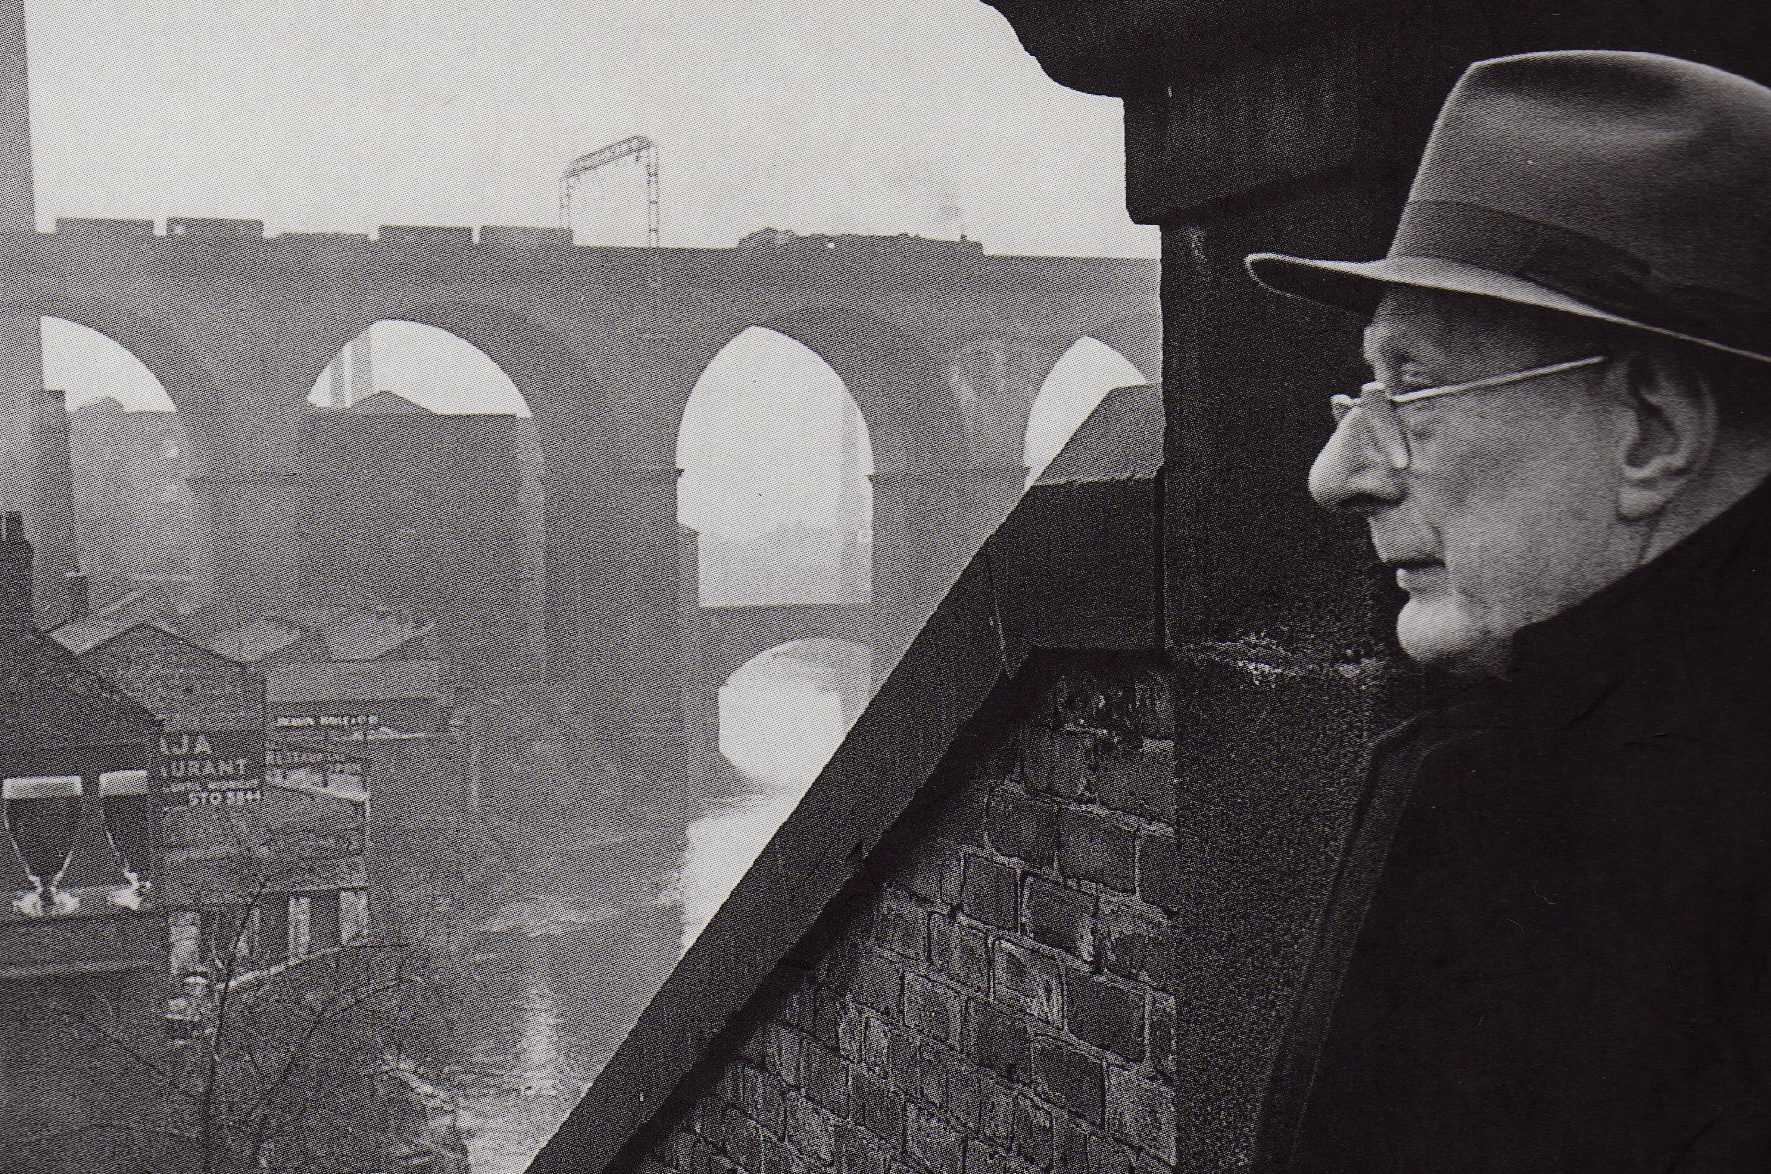 "The industrial scene got me" - How Salford inspired the legendary LS Lowry